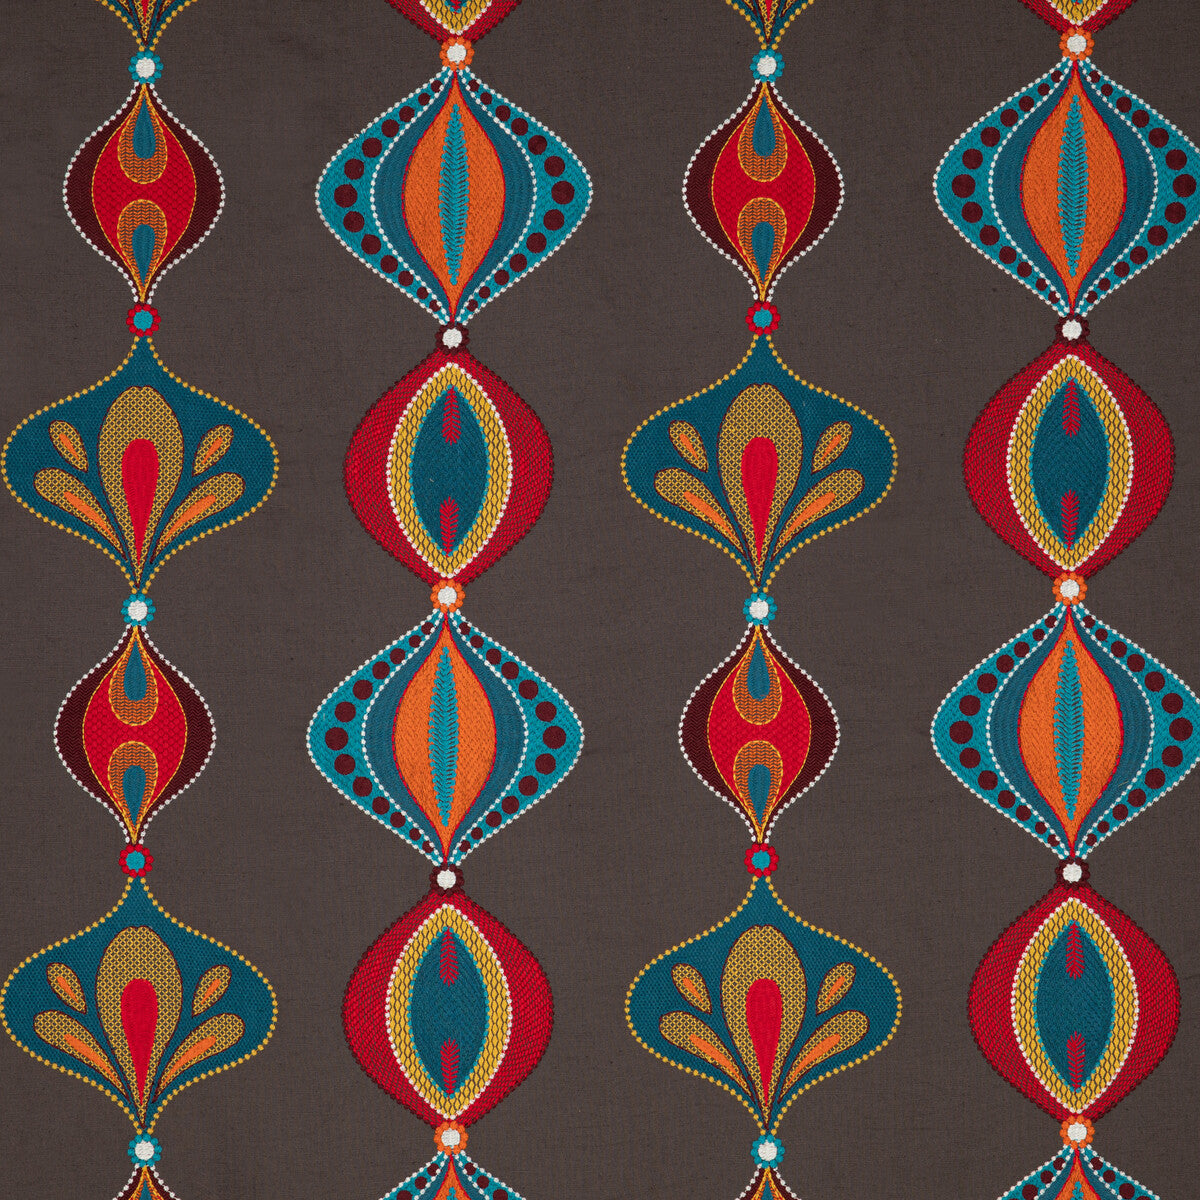 Viva fabric in teal/spice color - pattern PF50471.1.0 - by Baker Lifestyle in the Fiesta collection